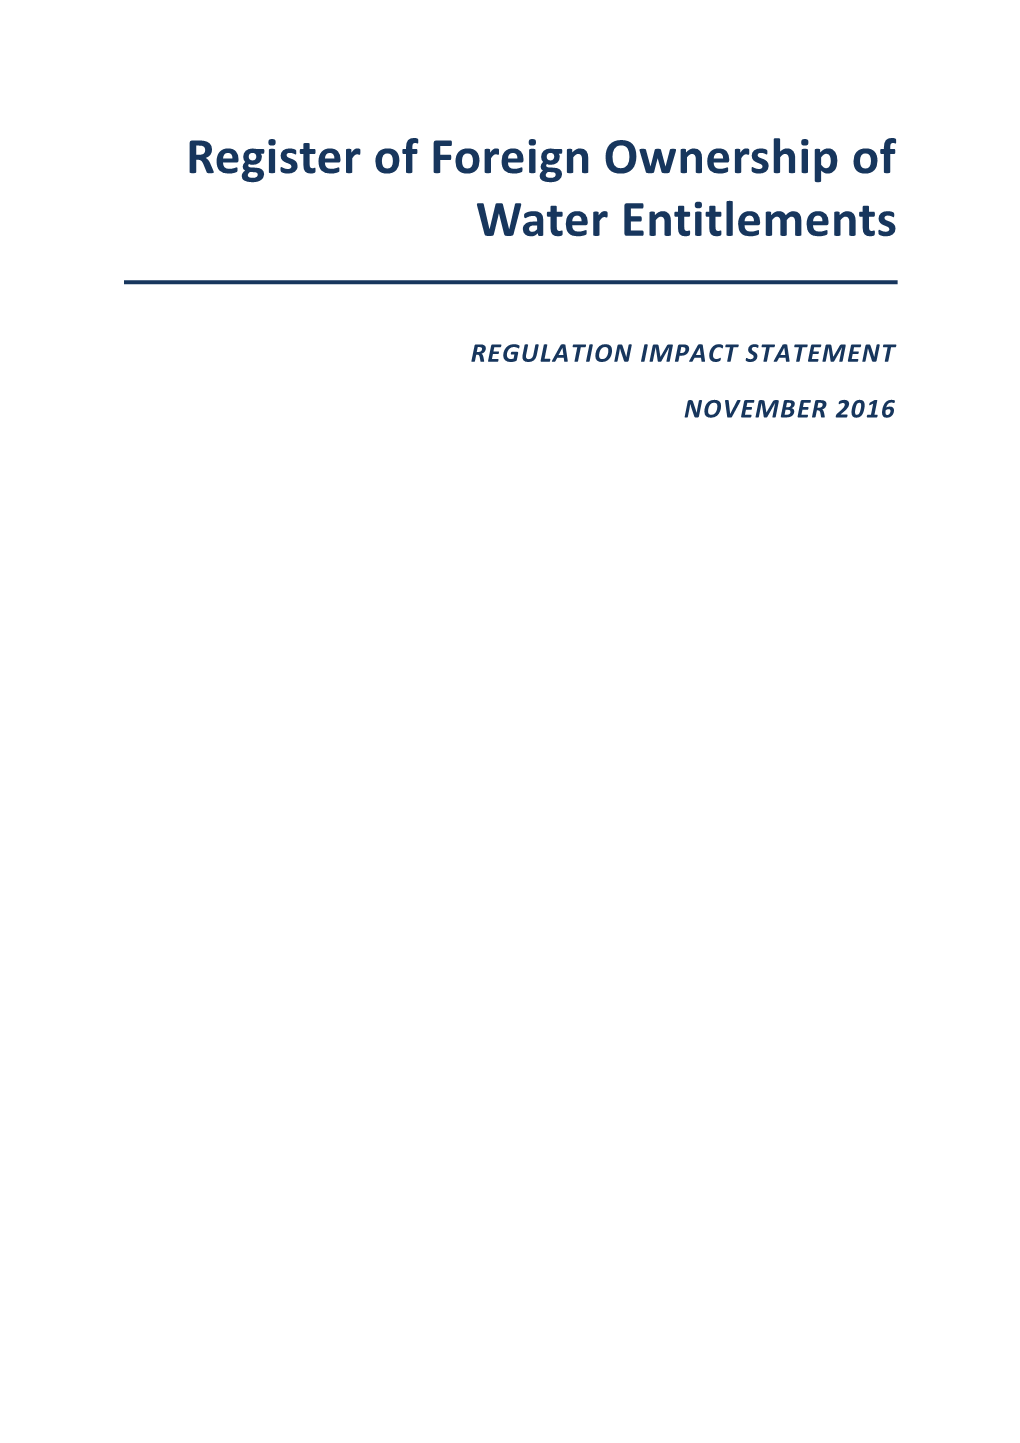 Register of Foreign Ownership of Water Entitlements